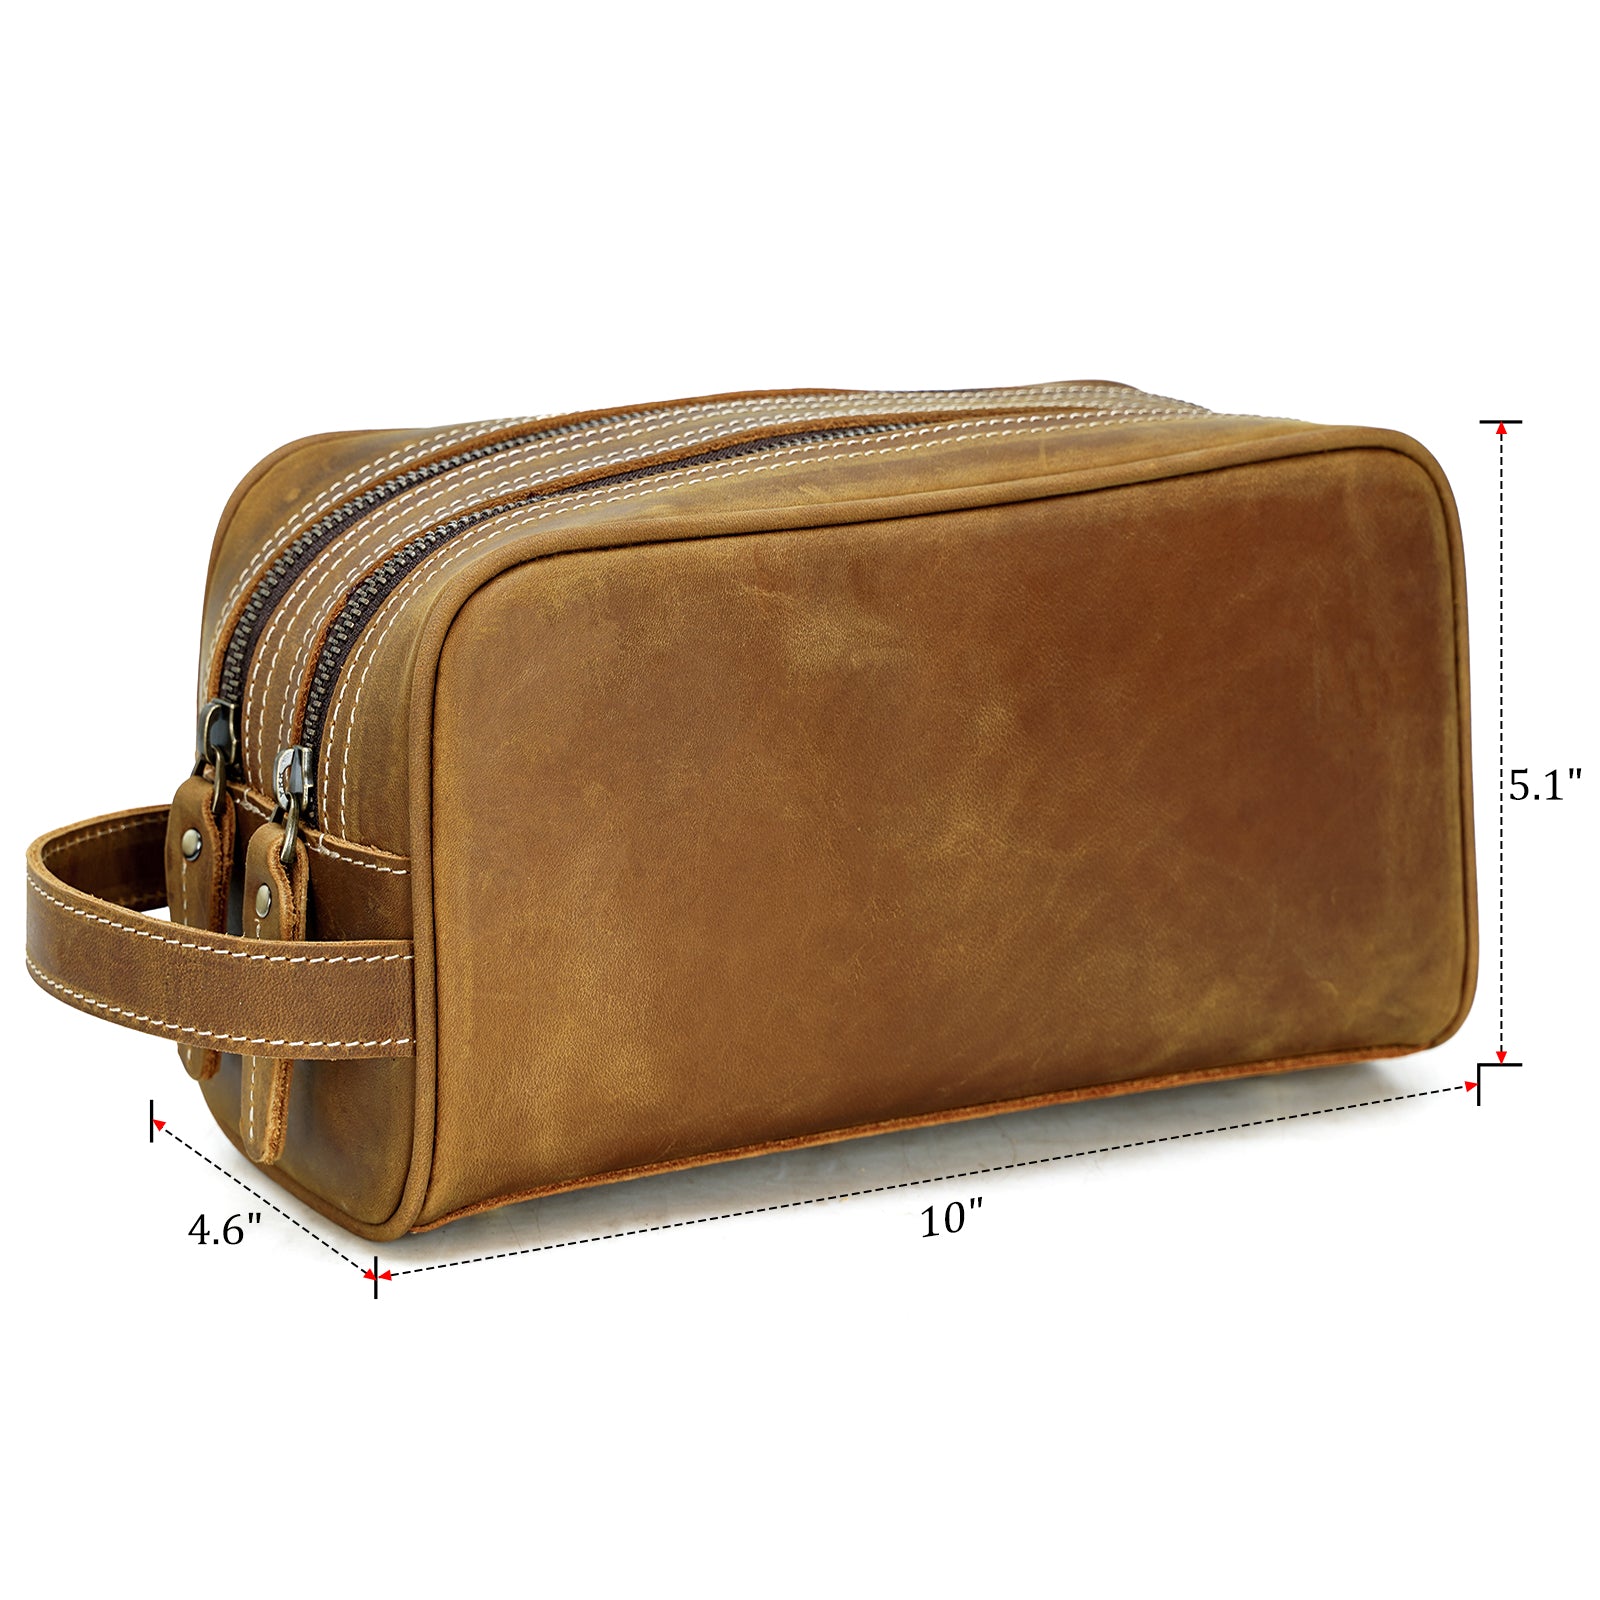 Polare Waxed Canvas Cowhide Leather Waterproof Travel Toiletry Bag Dop